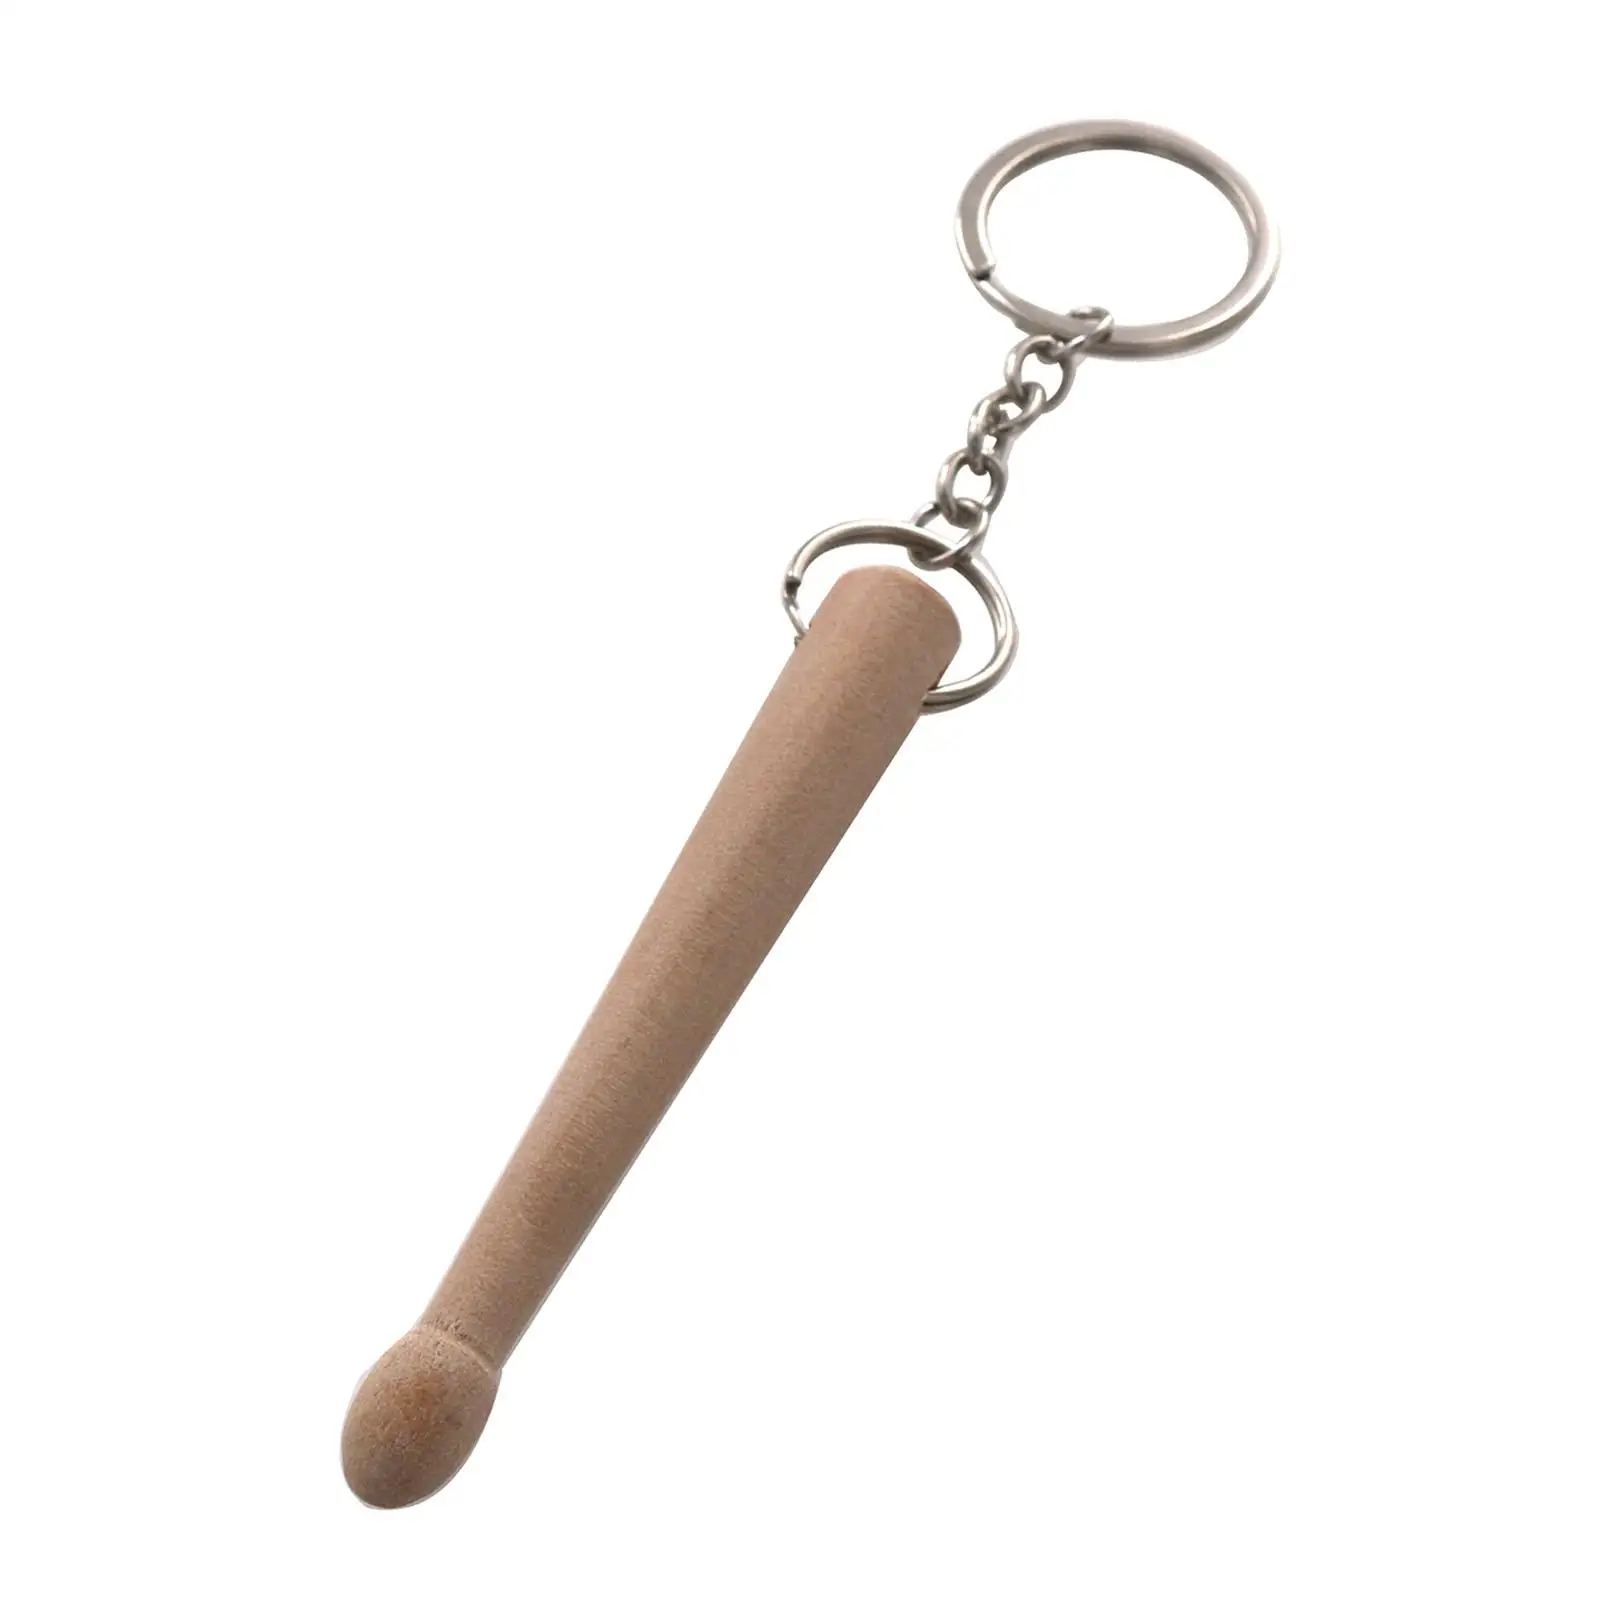 Drumstick Keychain Key Pendant Portable Wood Keychain Drumsticks Percussion Key Chain for Decoration Backpack Drummer Friends